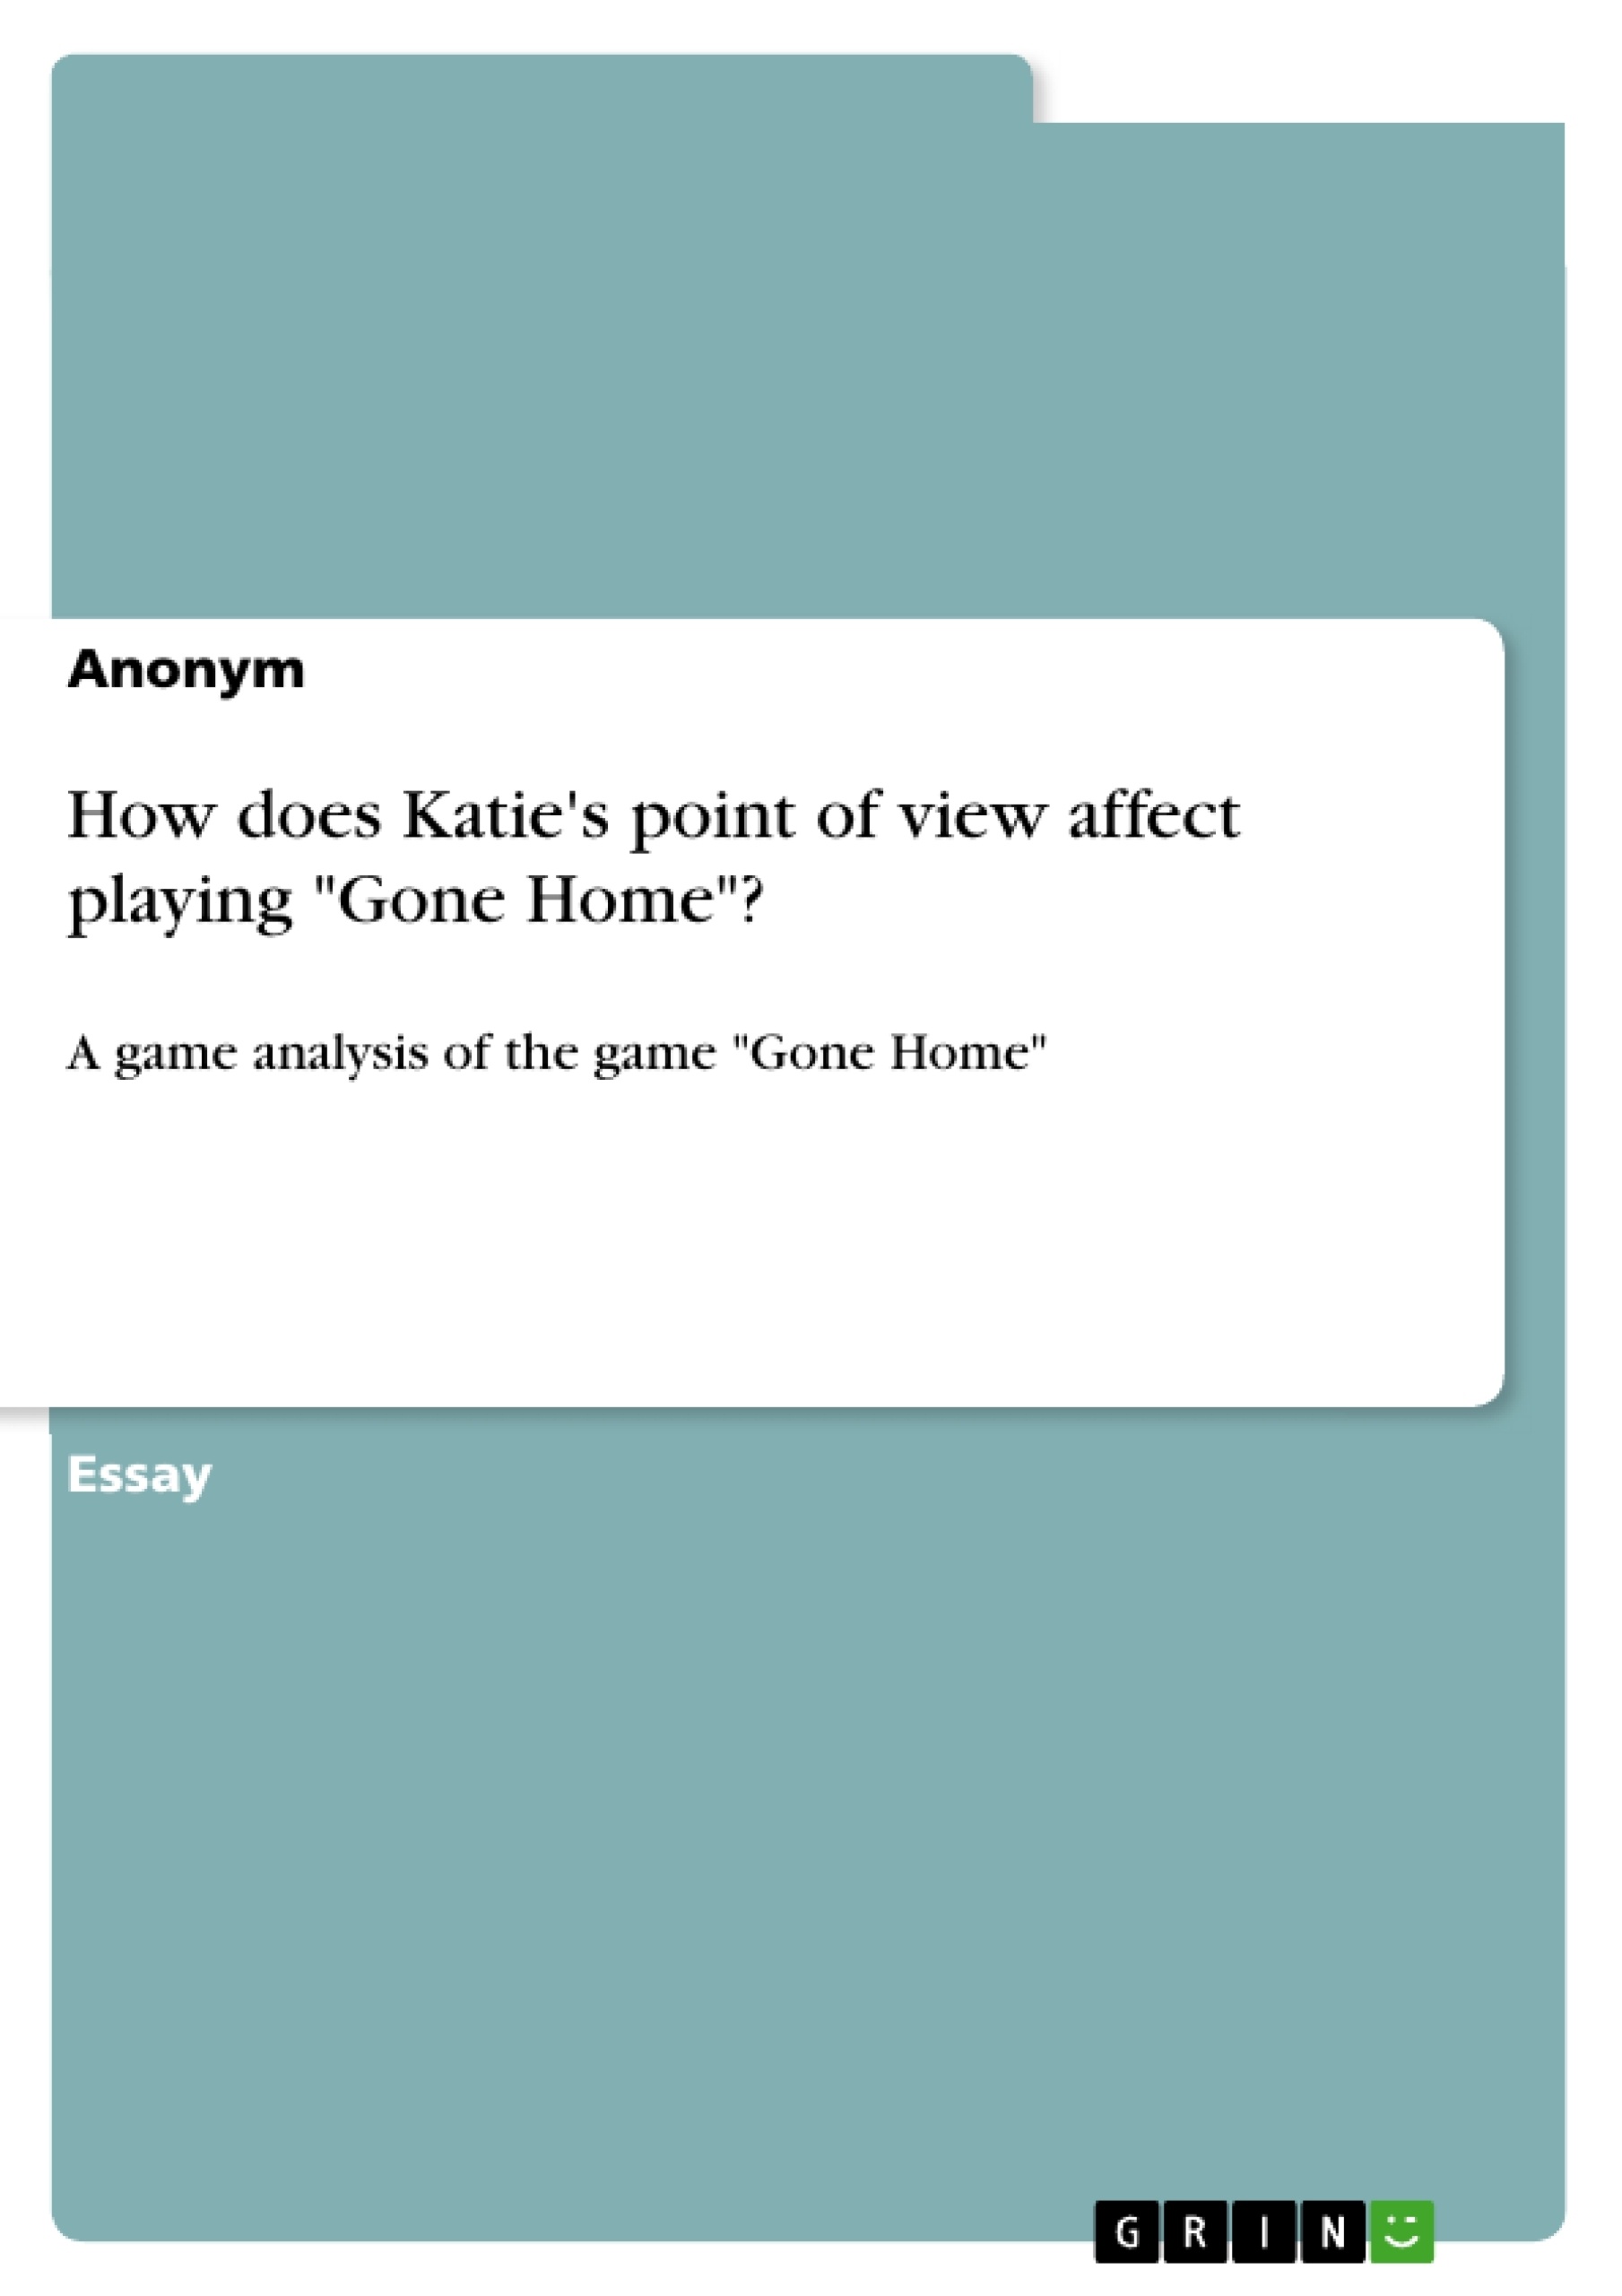 Titre: How does Katie's point of view affect playing "Gone Home"?